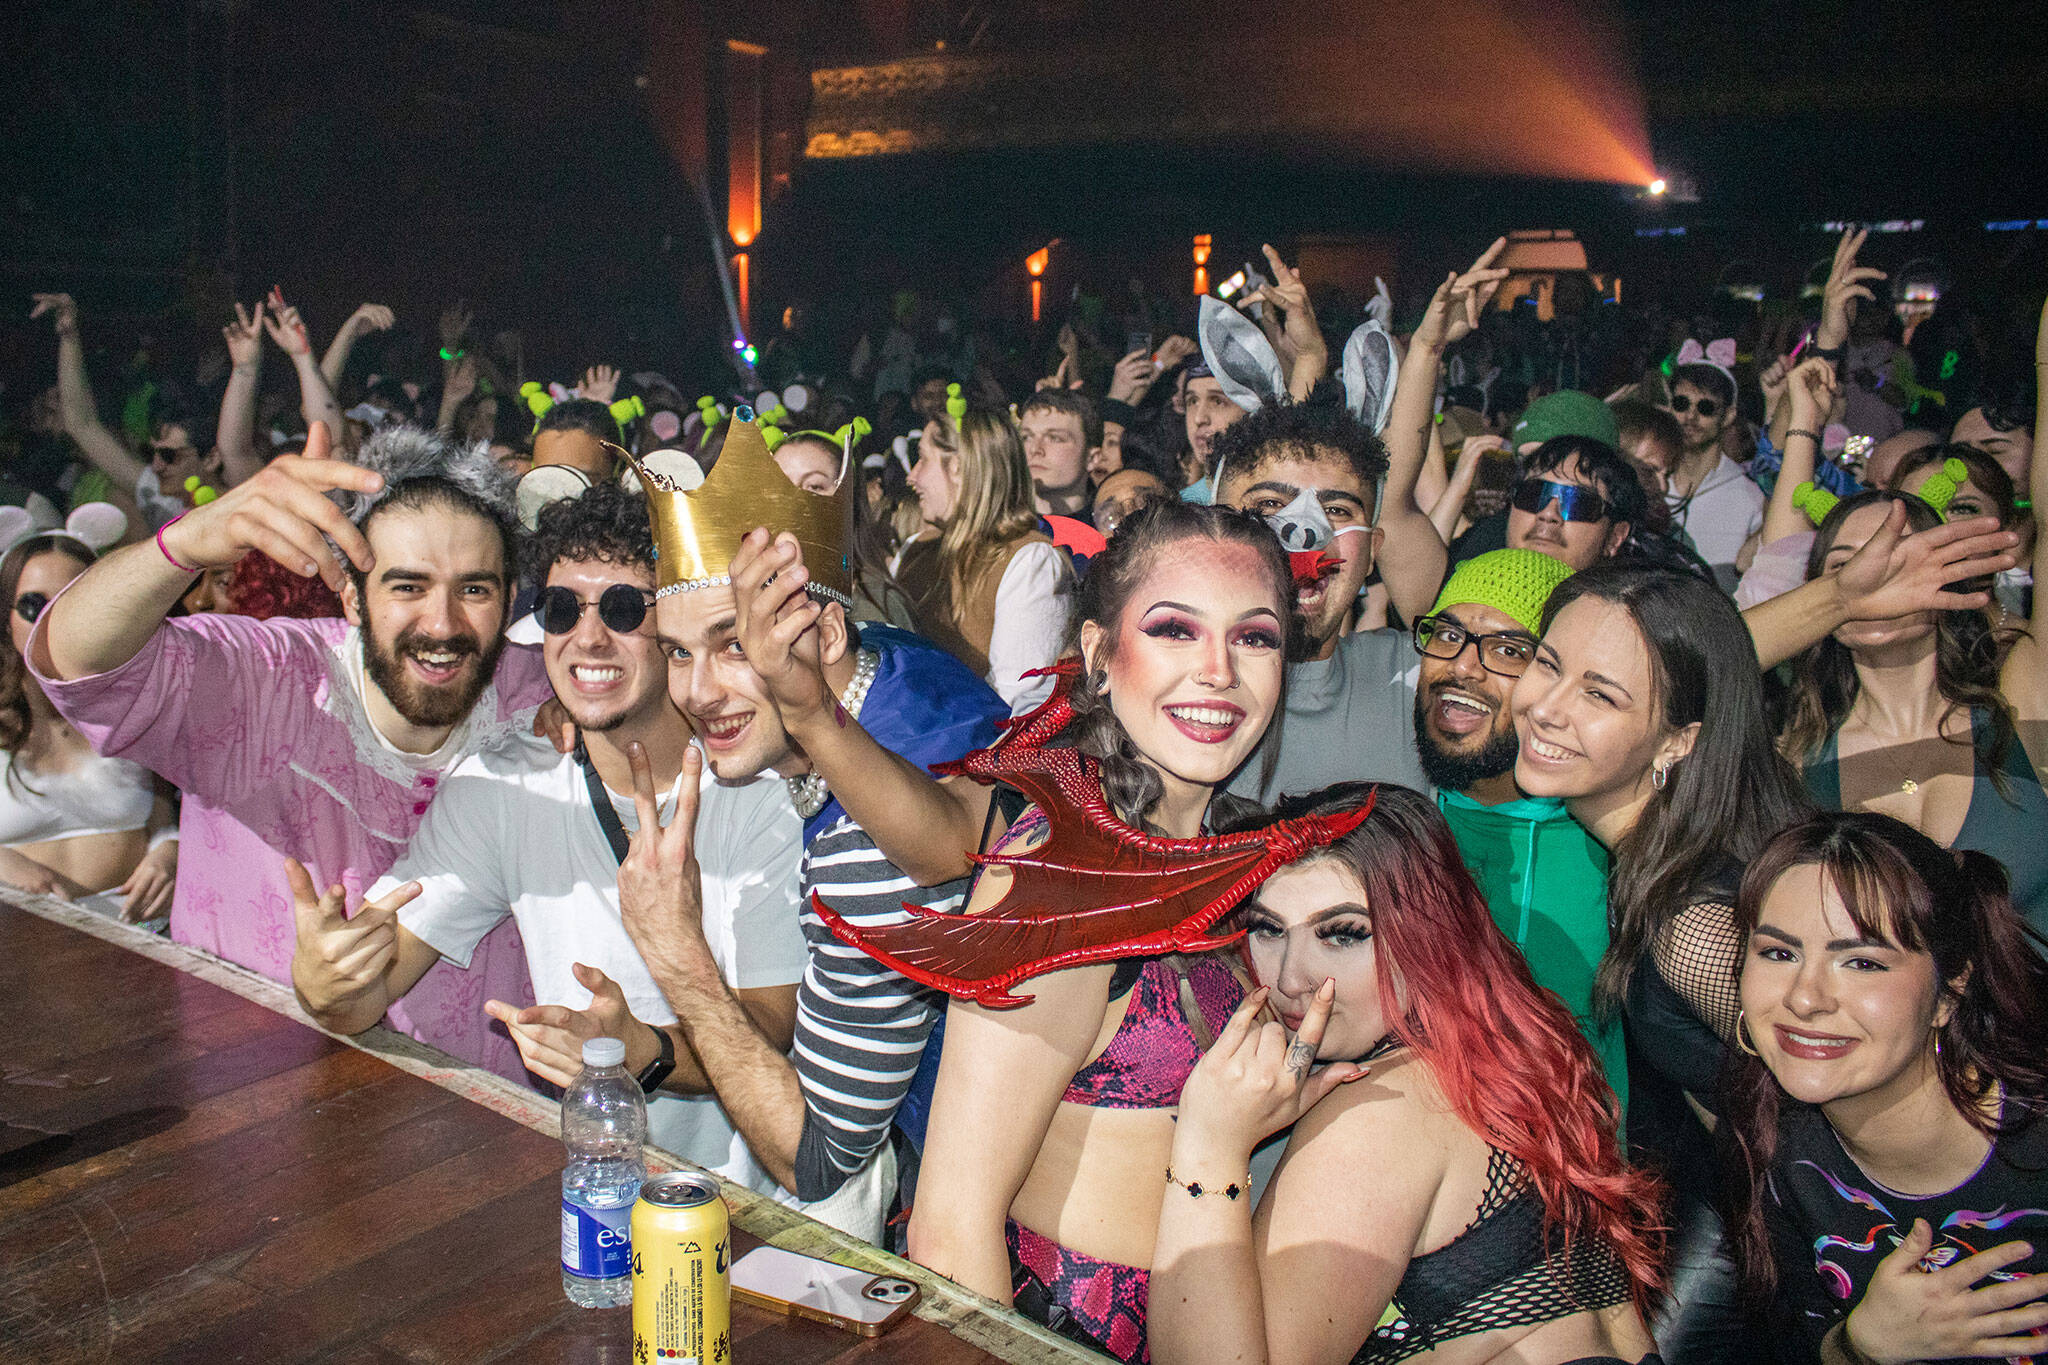 I went to the viral Shrek Rave in Toronto and here's how it went